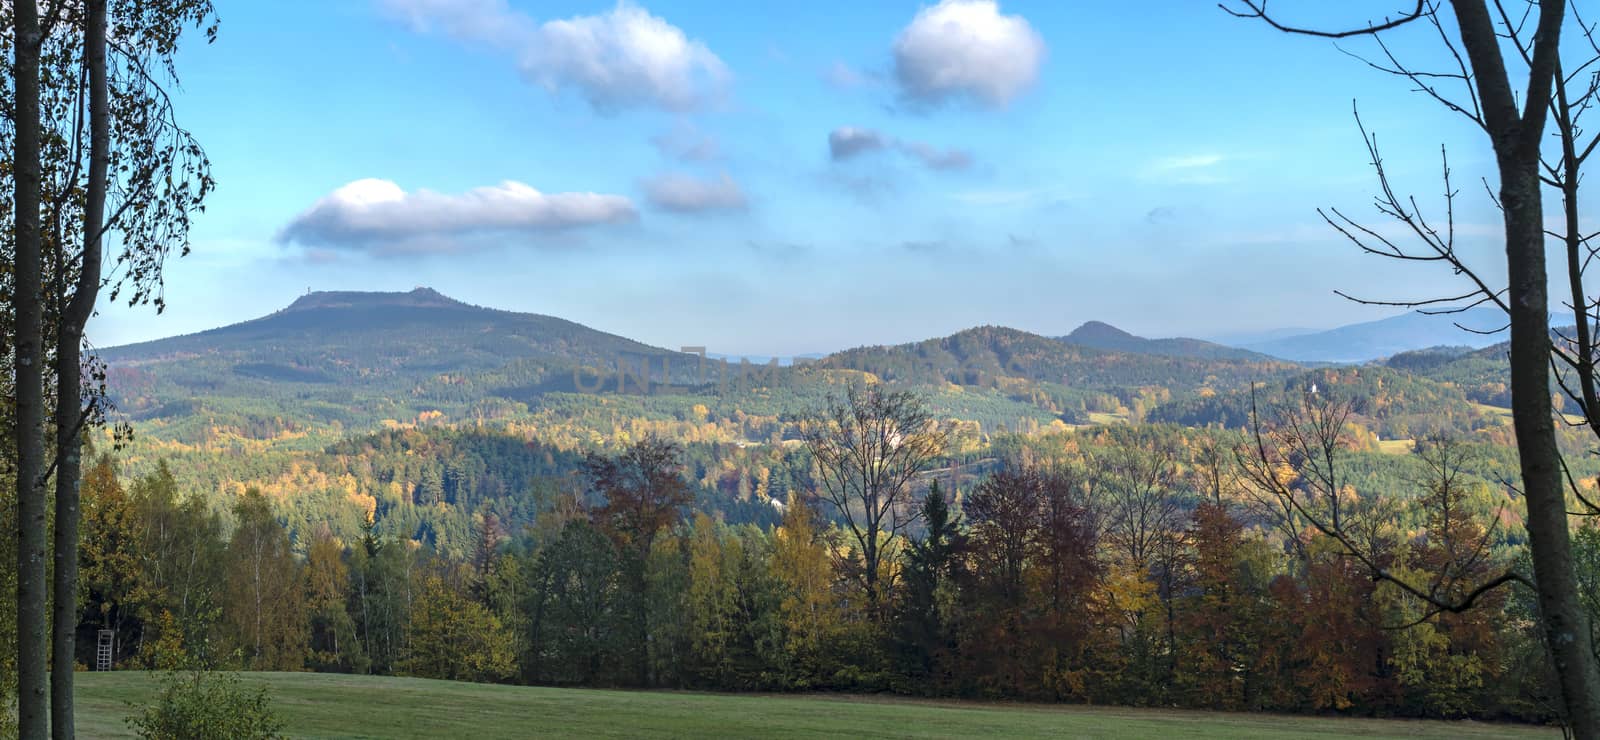 Luzicke hory panorama, meadow with autumn colorful forest and trees and hills with lookout tower on hill Hochwald Hvozd and blue sky landscape in luzicke hory mountain. by Henkeova